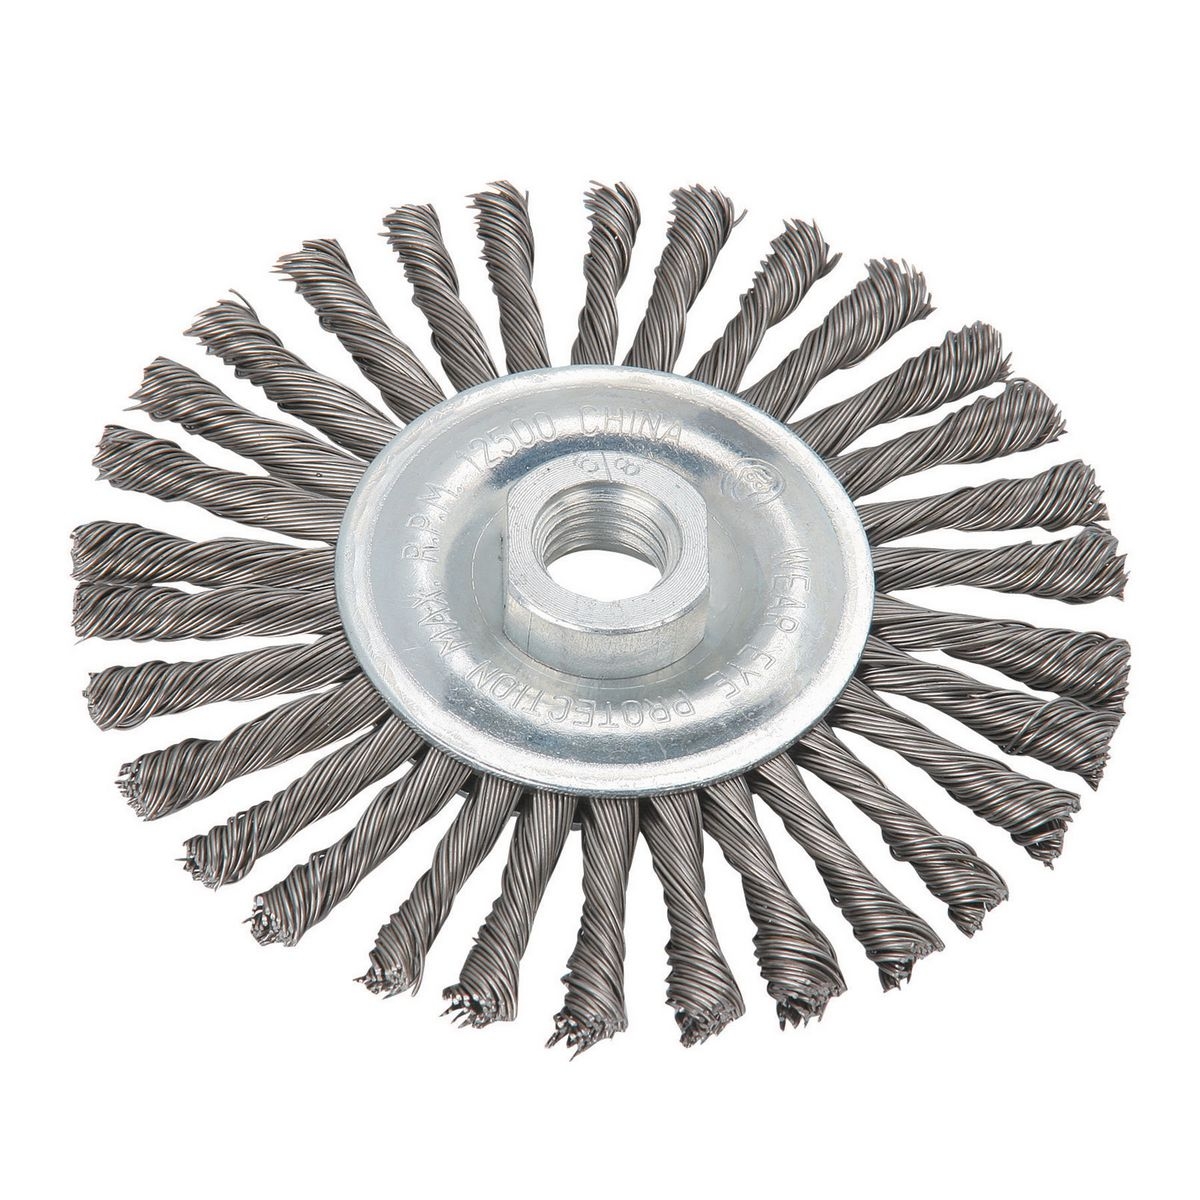 WARRIOR 4-1/2 in. Stainless Knotted Wire Wheel - Item 91282 / 60490